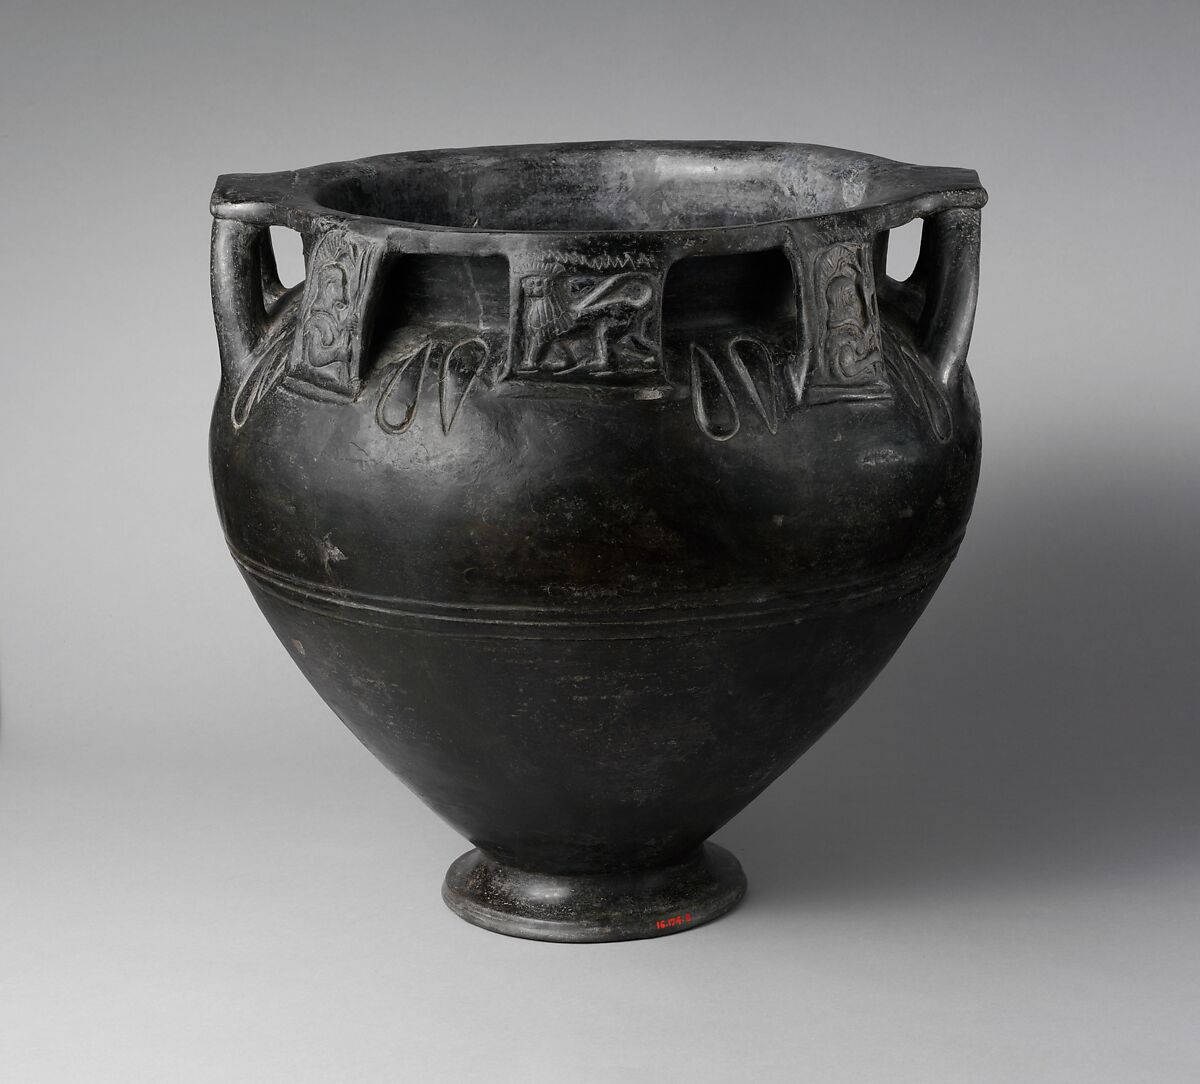 Terracotta column-krater (bowl for mixing wine and water), Terracotta, Etruscan 